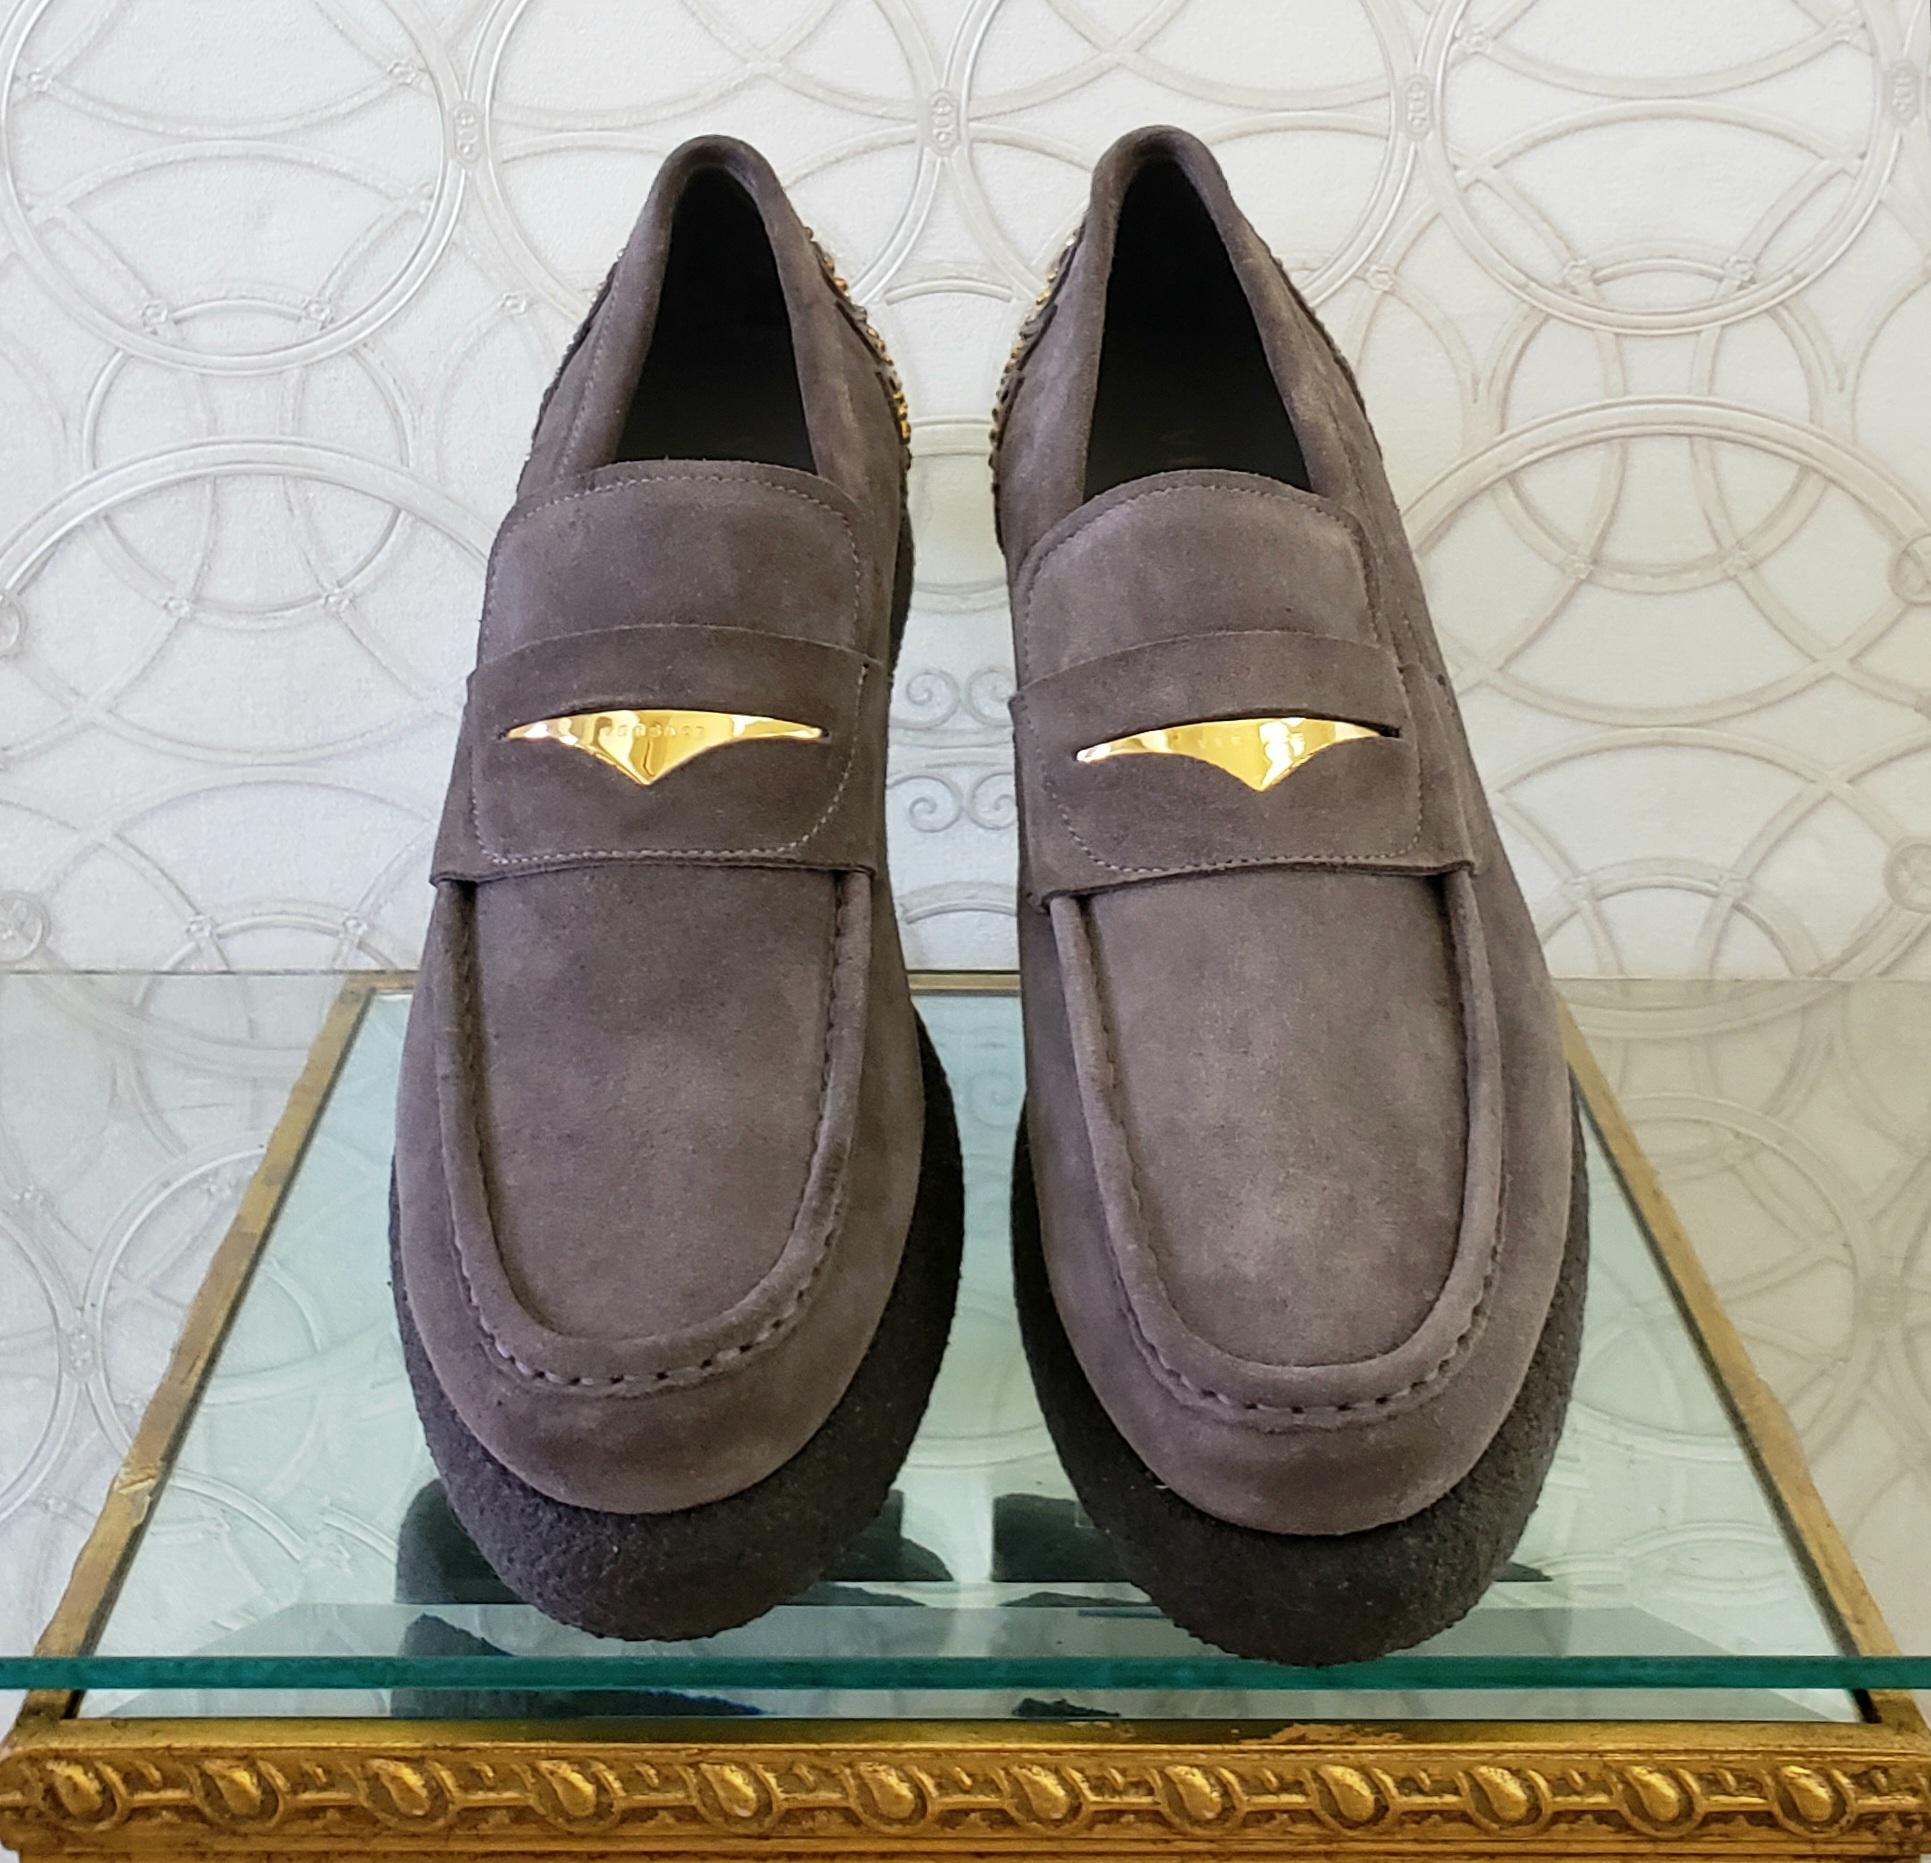 F/W2013 Look #22 NEW VERSACE GRAY SUEDE LEATHER LOAFERS SHOES with STUDS 44 - 11 For Sale 2